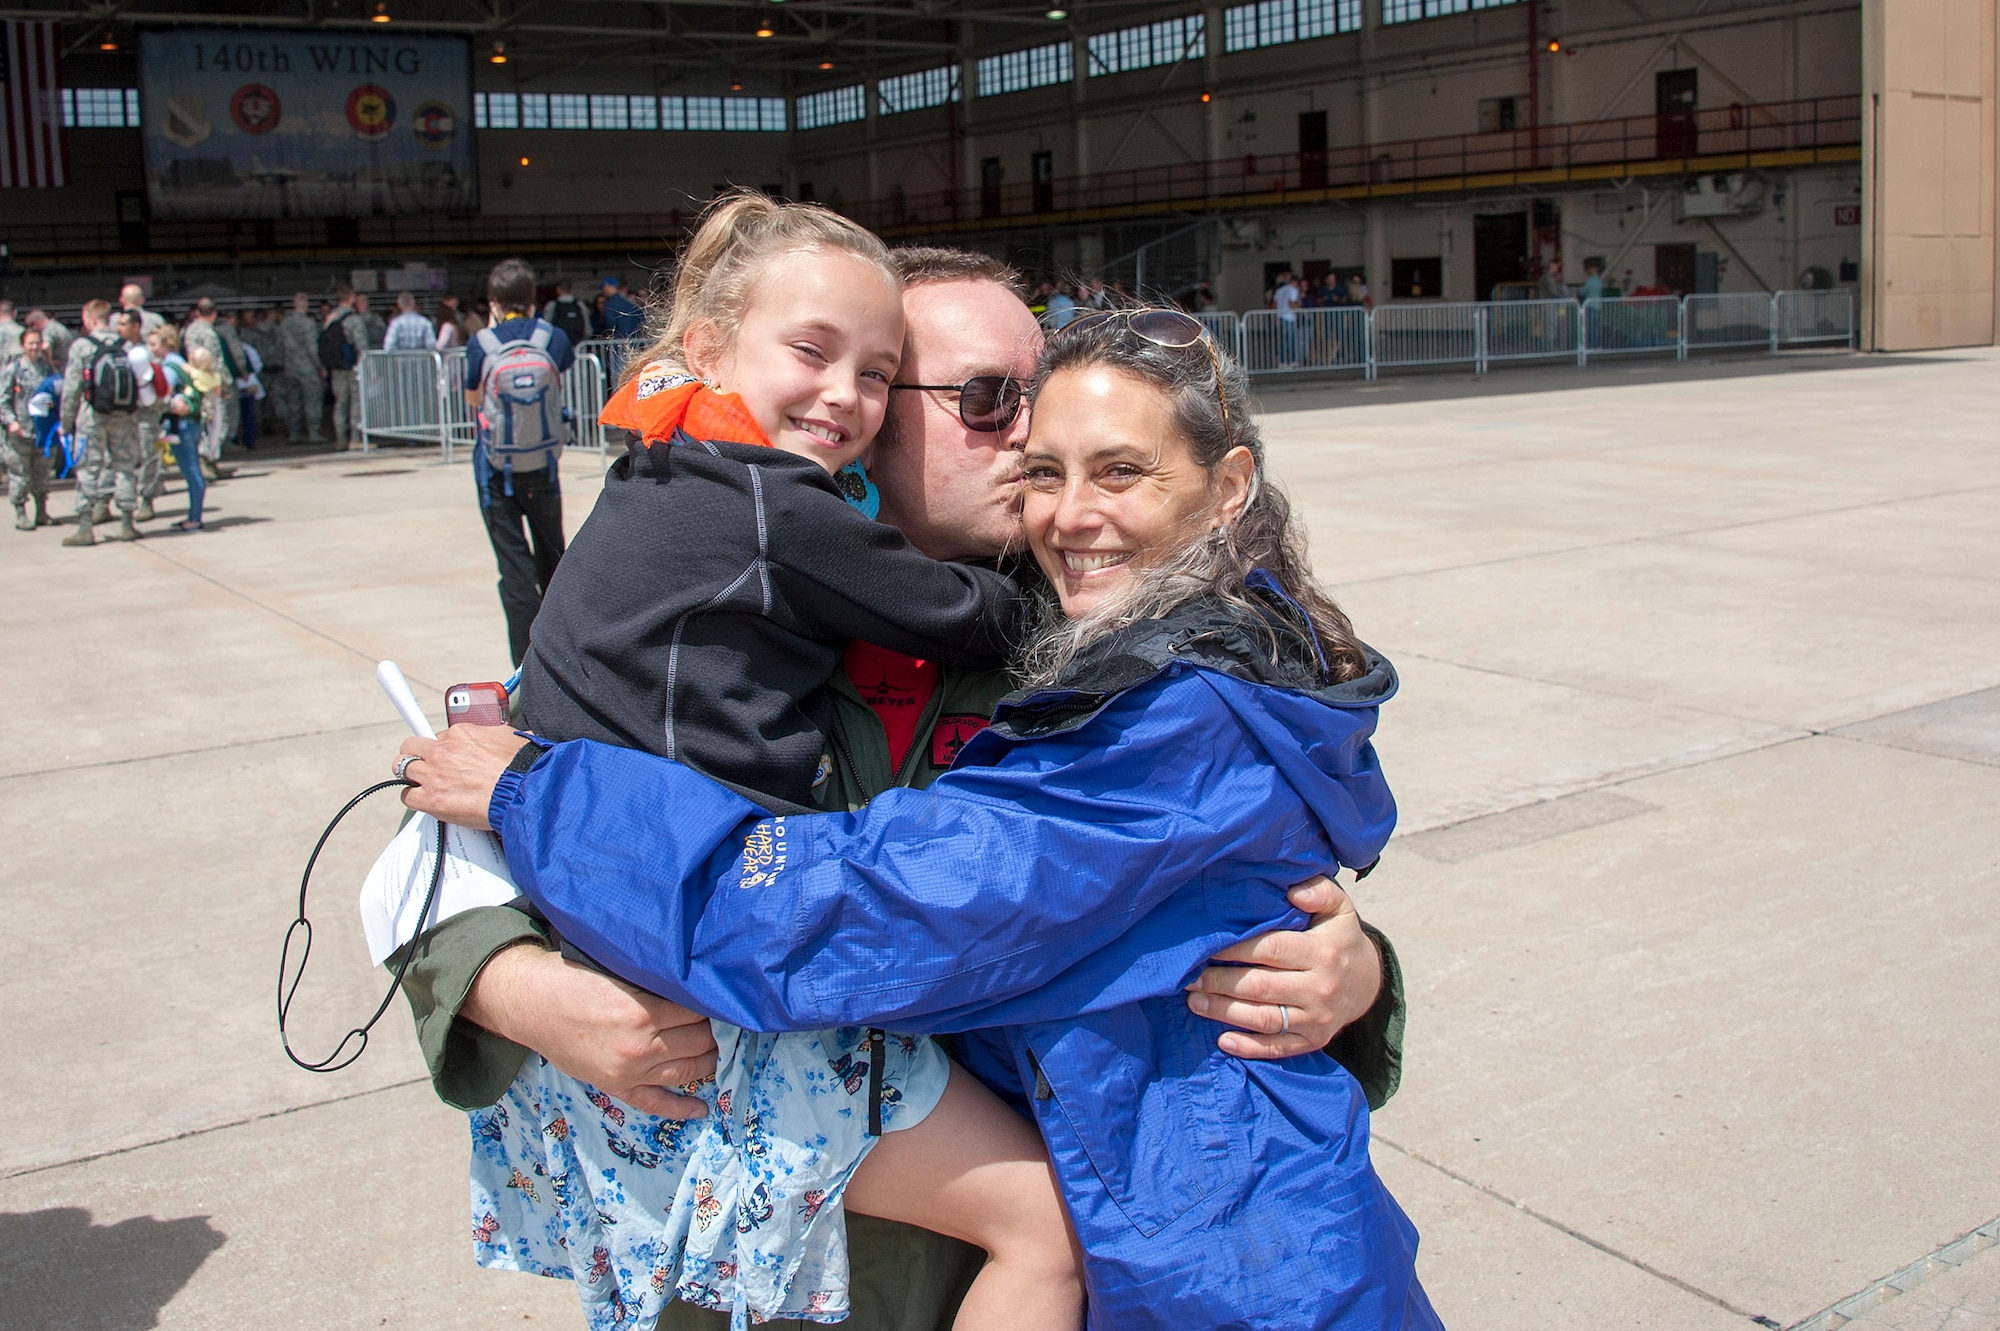 Lt. Col. Craig Wolf, an F-16 pilot with the 120th Fighter Squadron, 140th Wing, embraces his wife and daughter at Buckley AFB, Colo. May 15, 2015 after returning home from a 3-month deployment to the Republic of Korea. (U.S. Air National Guard photo by Senior Master Sgt. John Rohrer) 